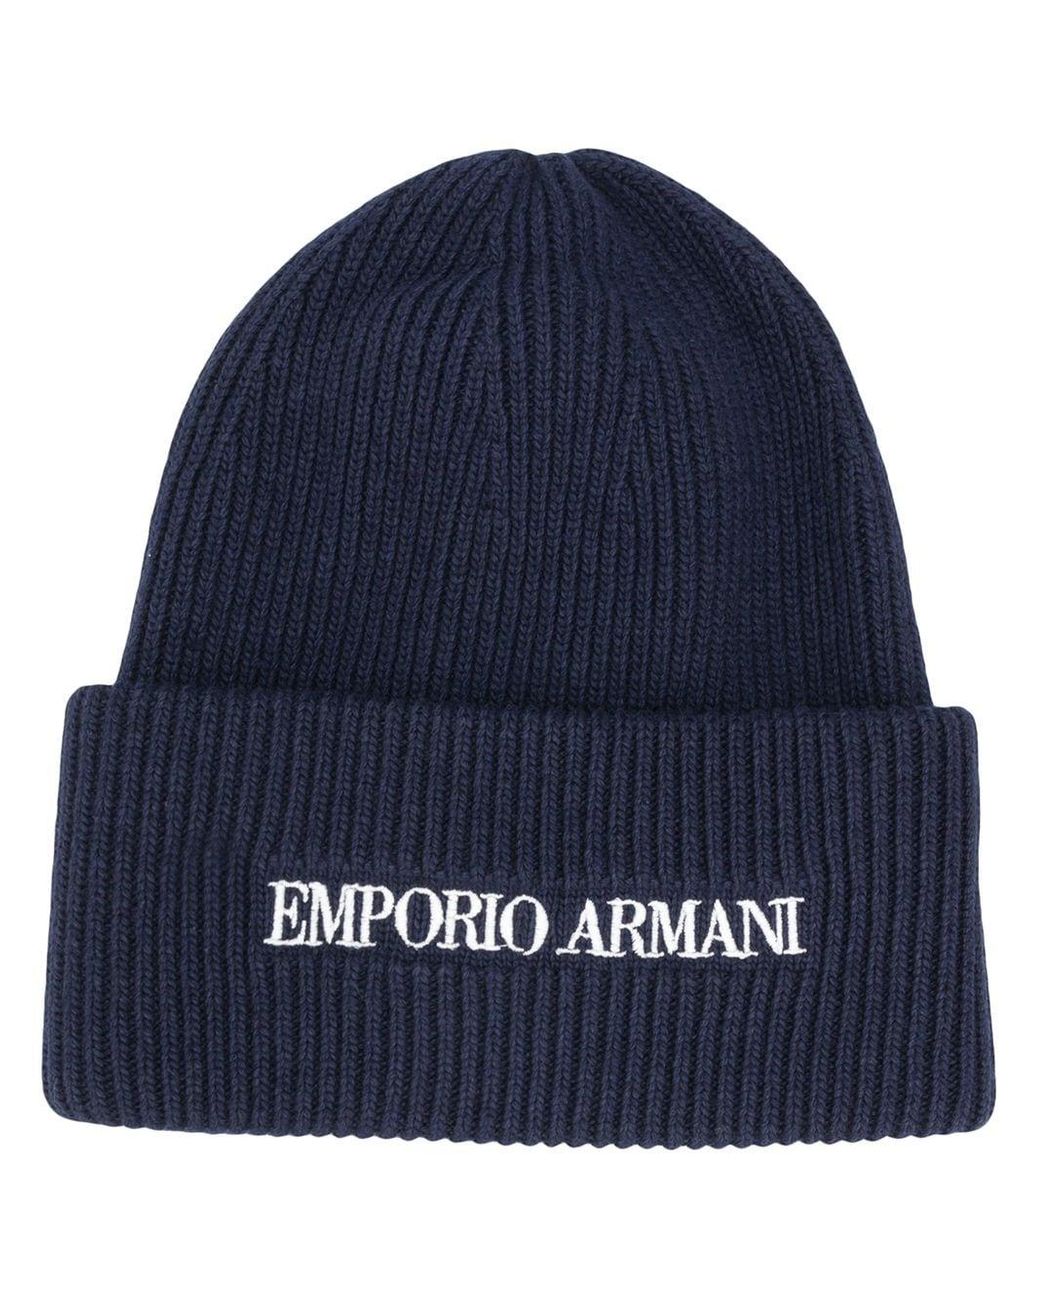 Emporio Armani Synthetic Embroidered Logo Beanie in Blue for Men - Lyst